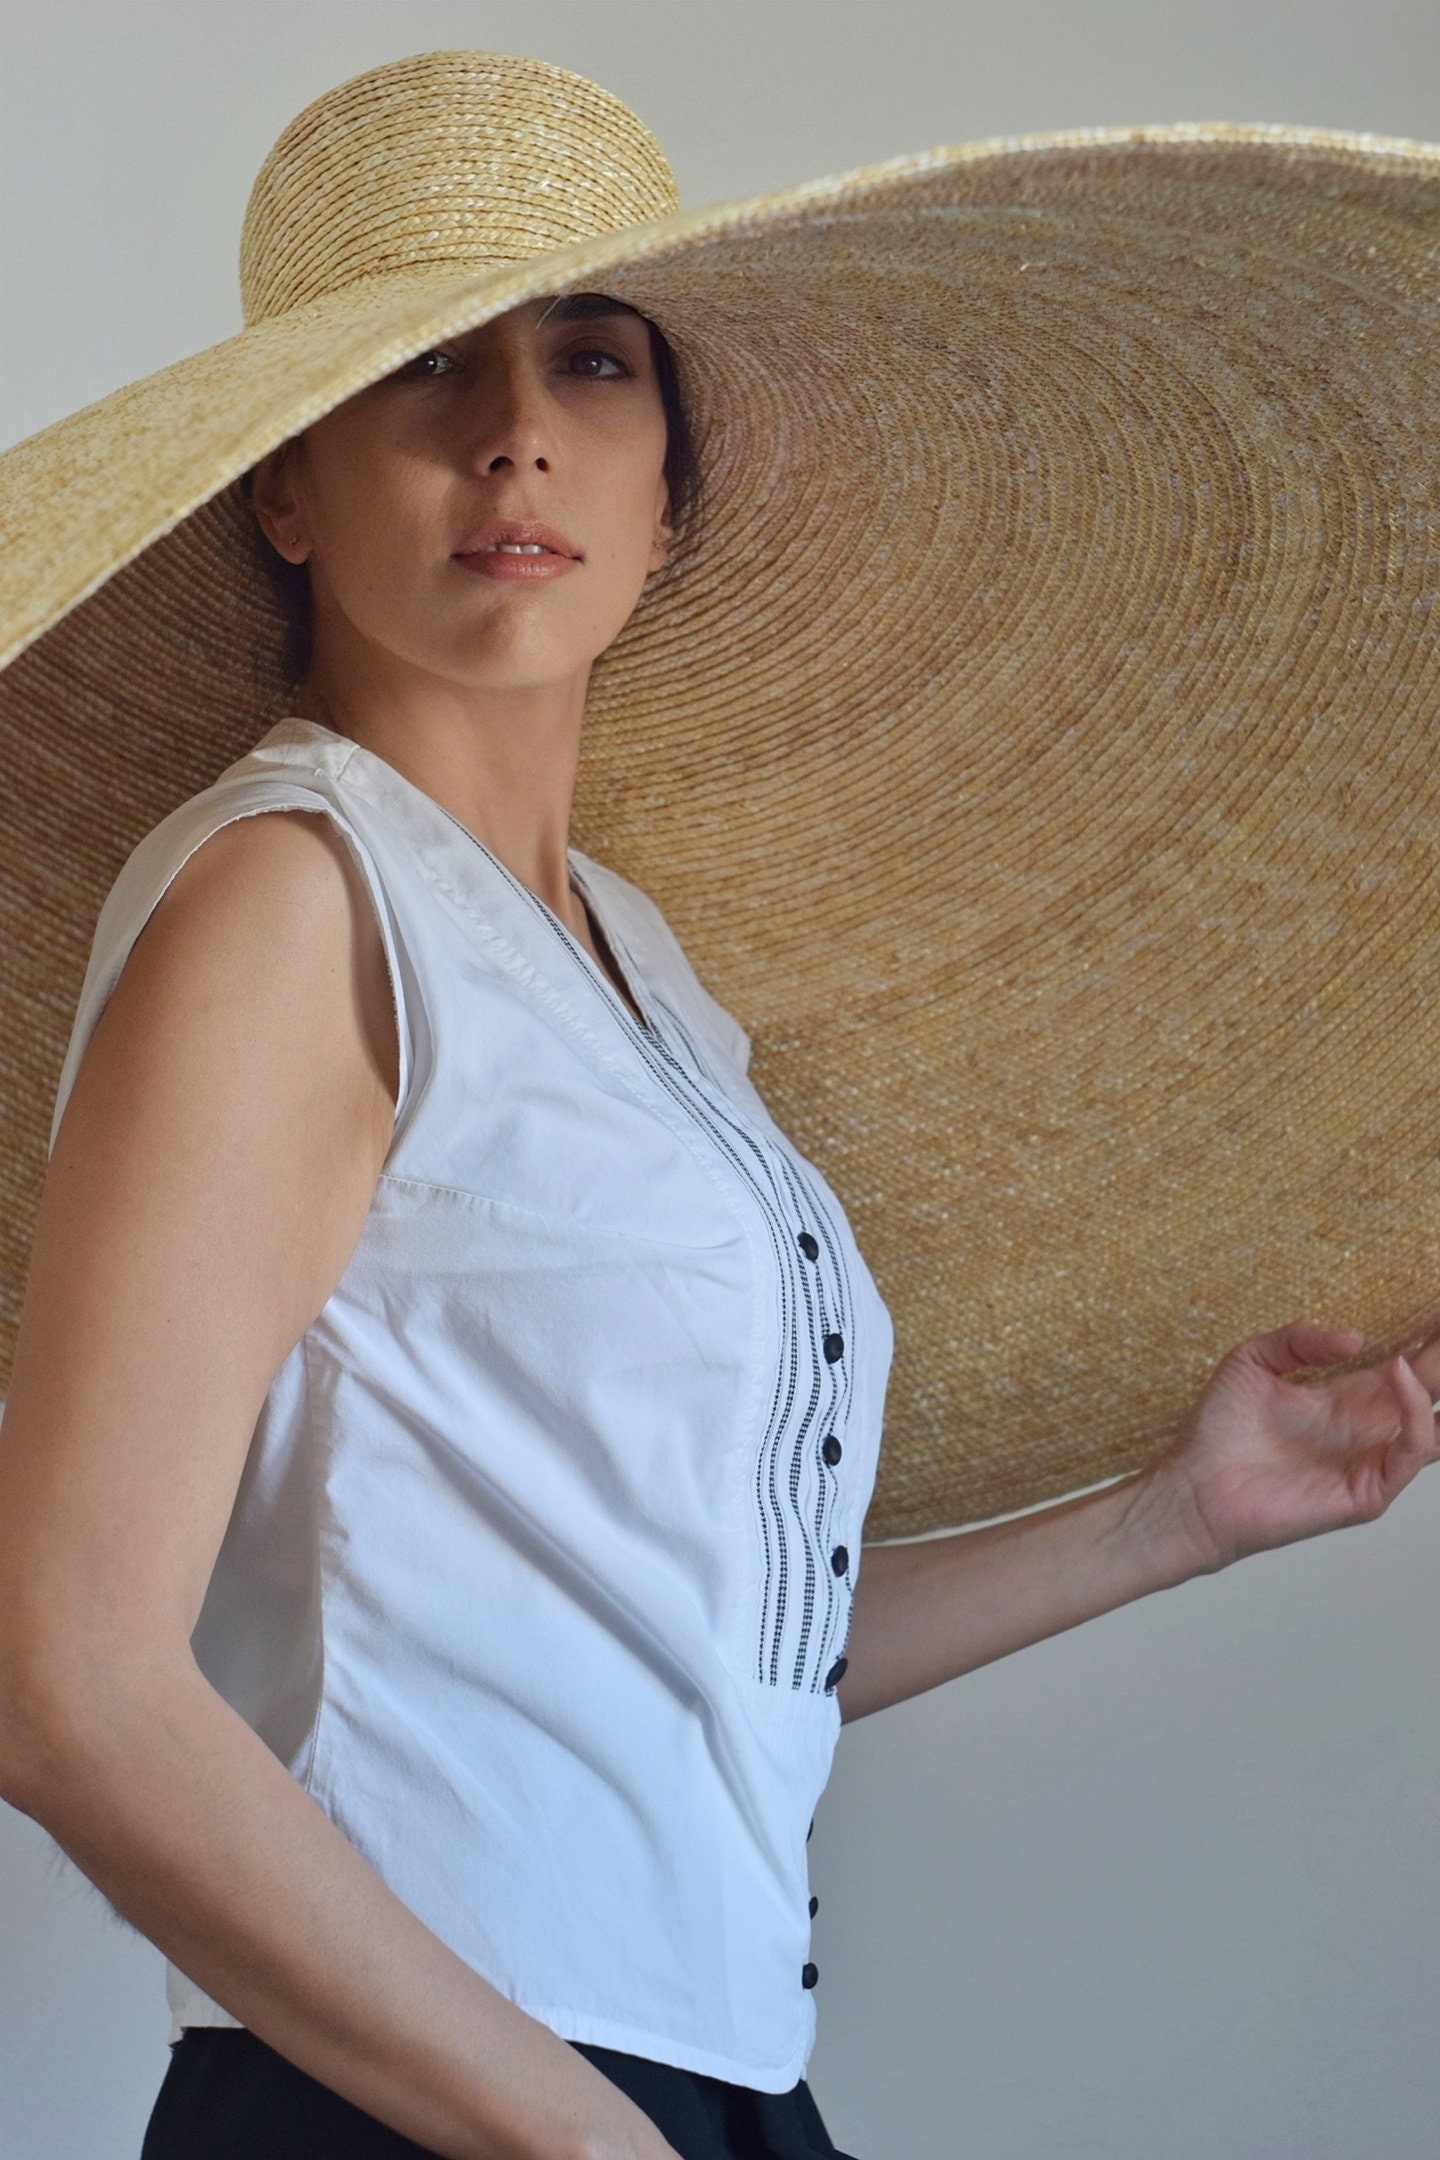 A Top Quality Oversized Giant Straw Couture Hat, Handmade of 100